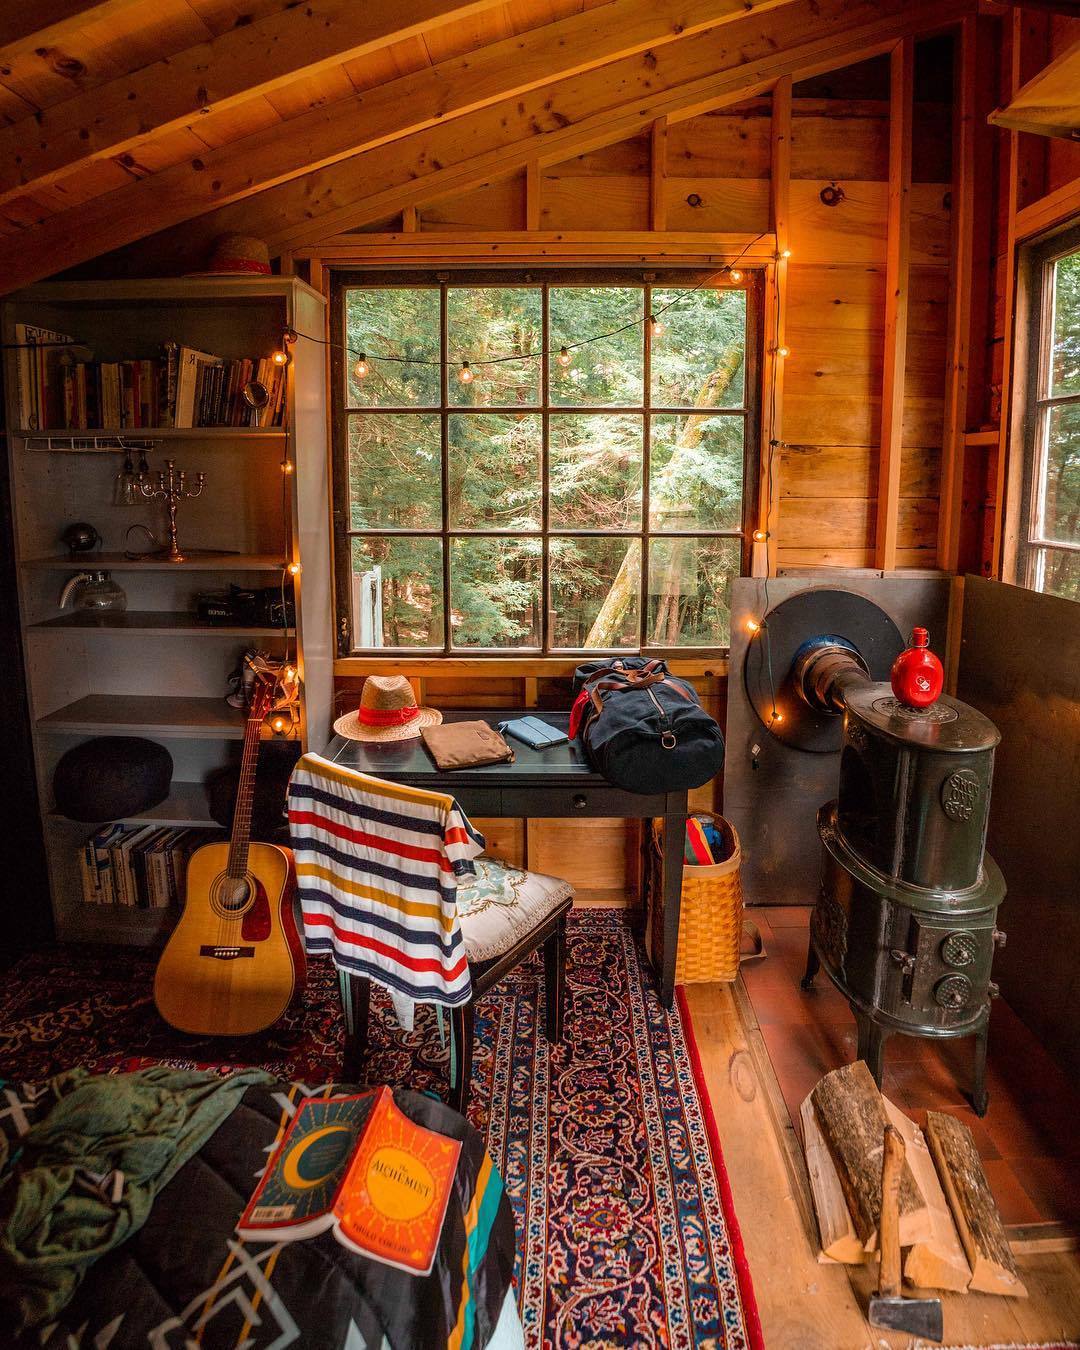 warm and cozy cabin interior with wood burning stove